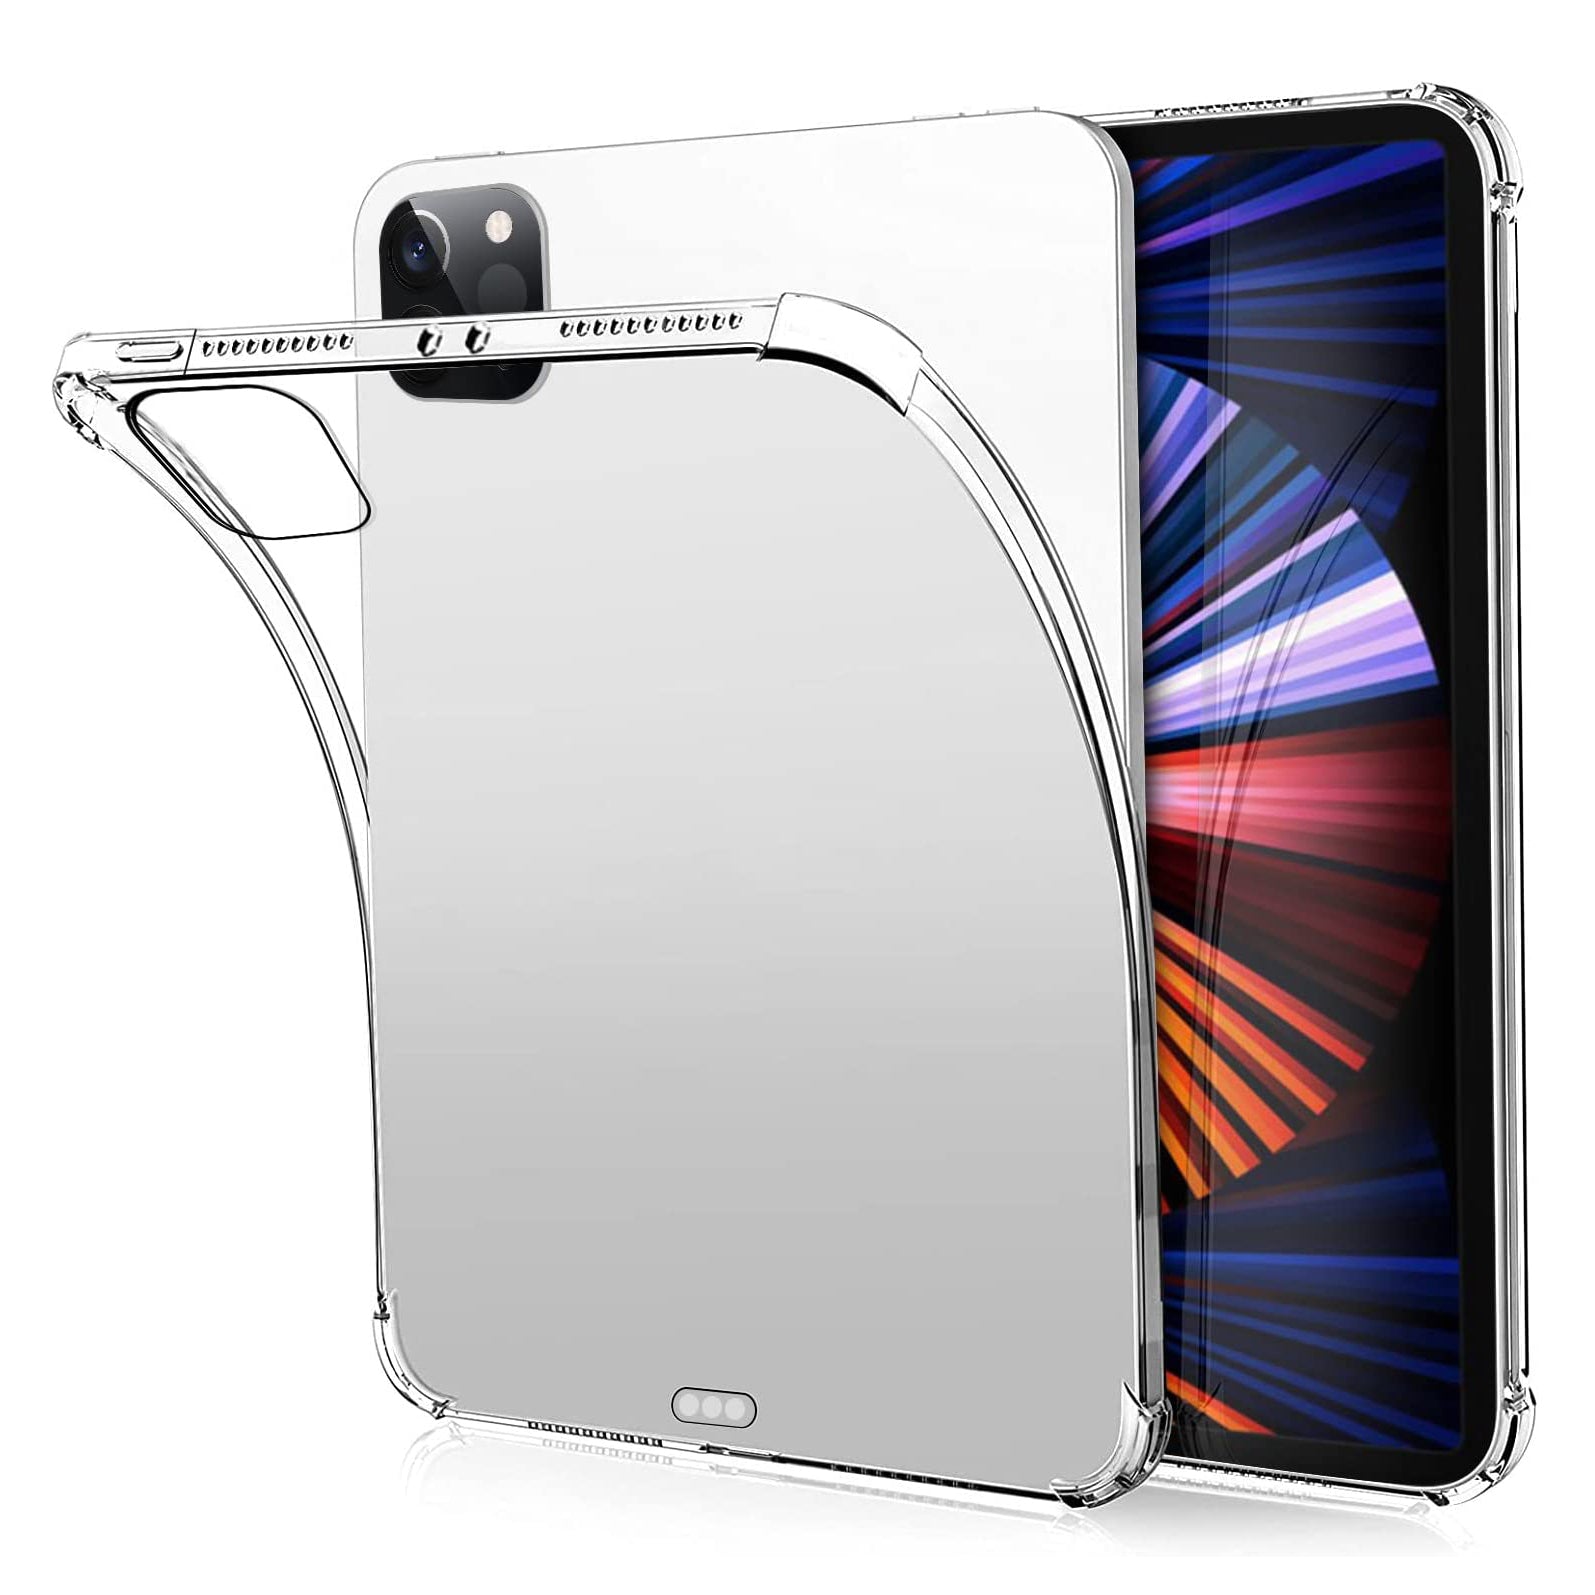 Clear Soft TPU Cover For Apple iPad Pro 12.9 4th Gen 2020 ShockProof Bumper Case